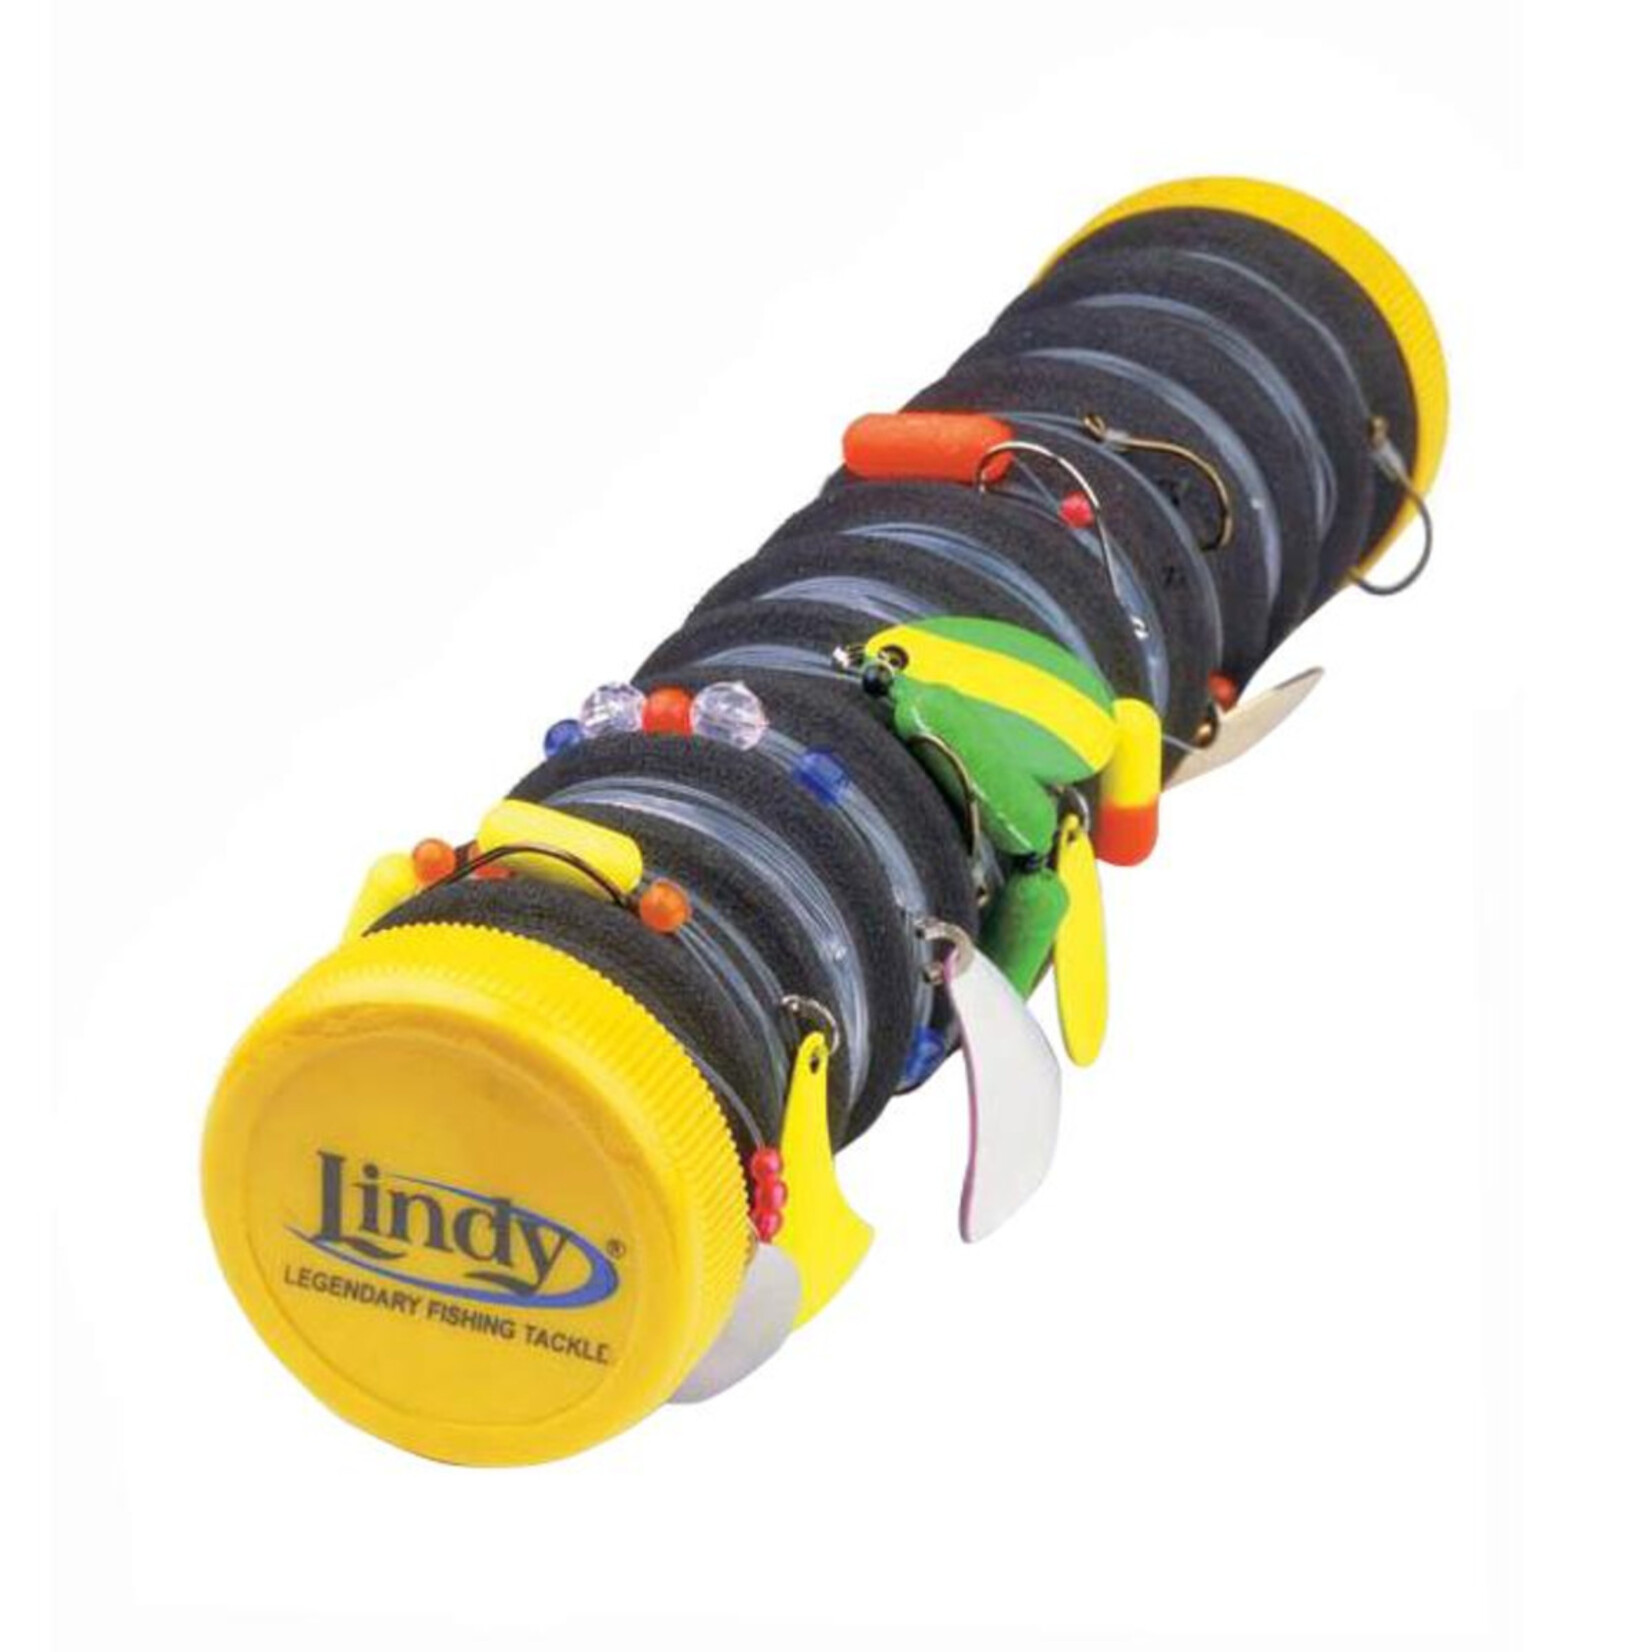 USE PRADCO 20225 LINDY RIGGER HOLDER HOLDS WORM HARNESSES/SNELLEDHOOKS ---IT FLOATS!---